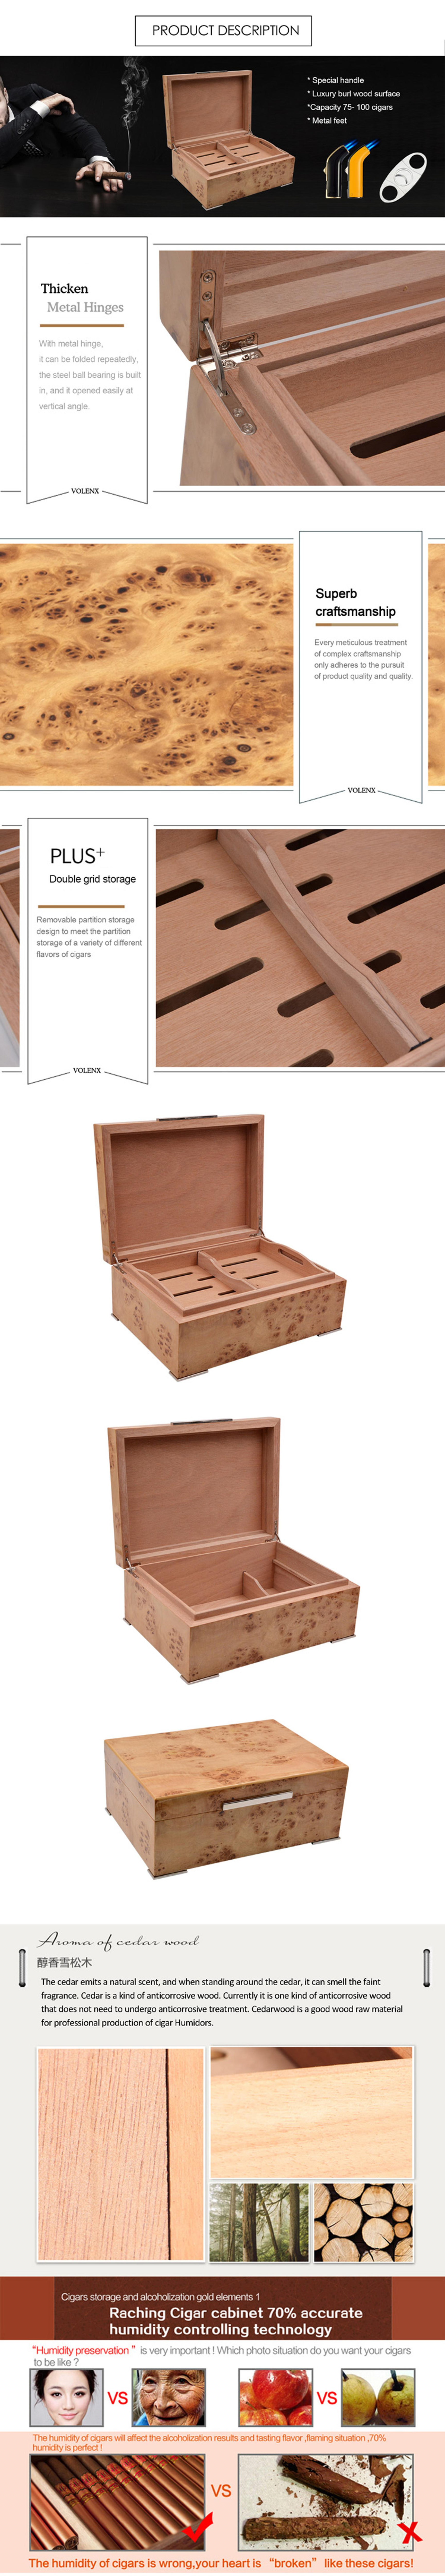 humidor WLH-0168 Details 3